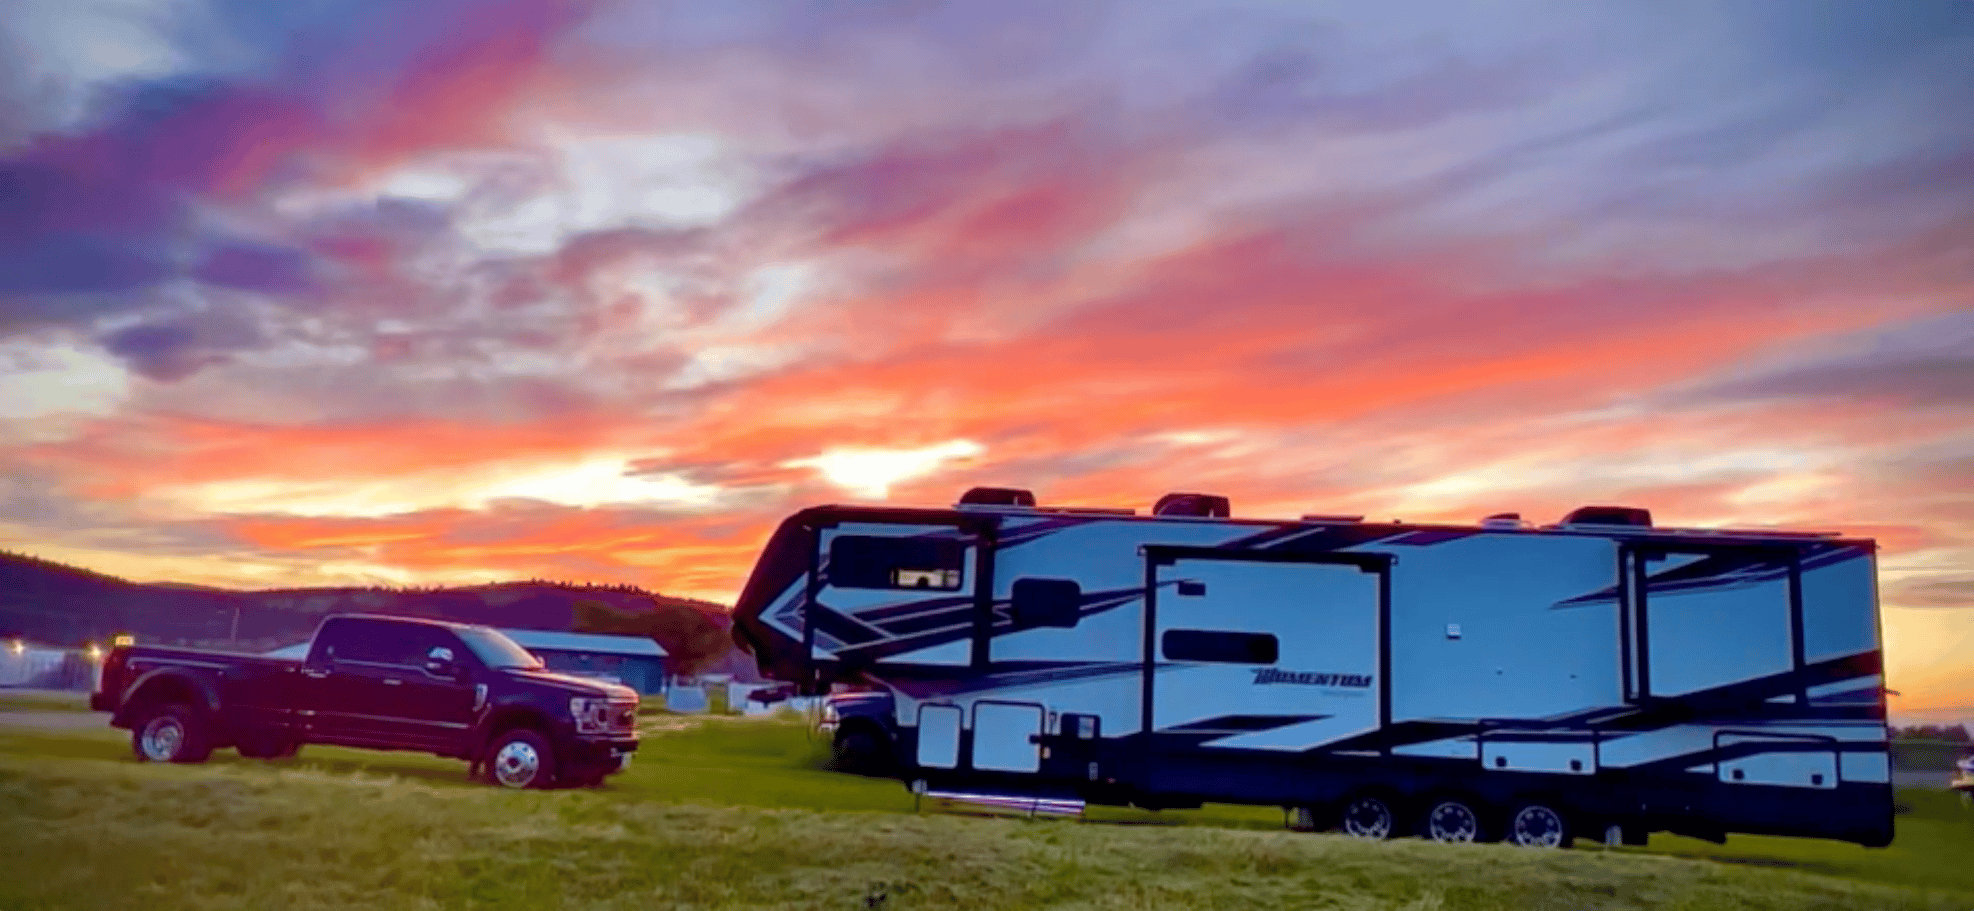 My Bucket List Day RV parked during a sunset